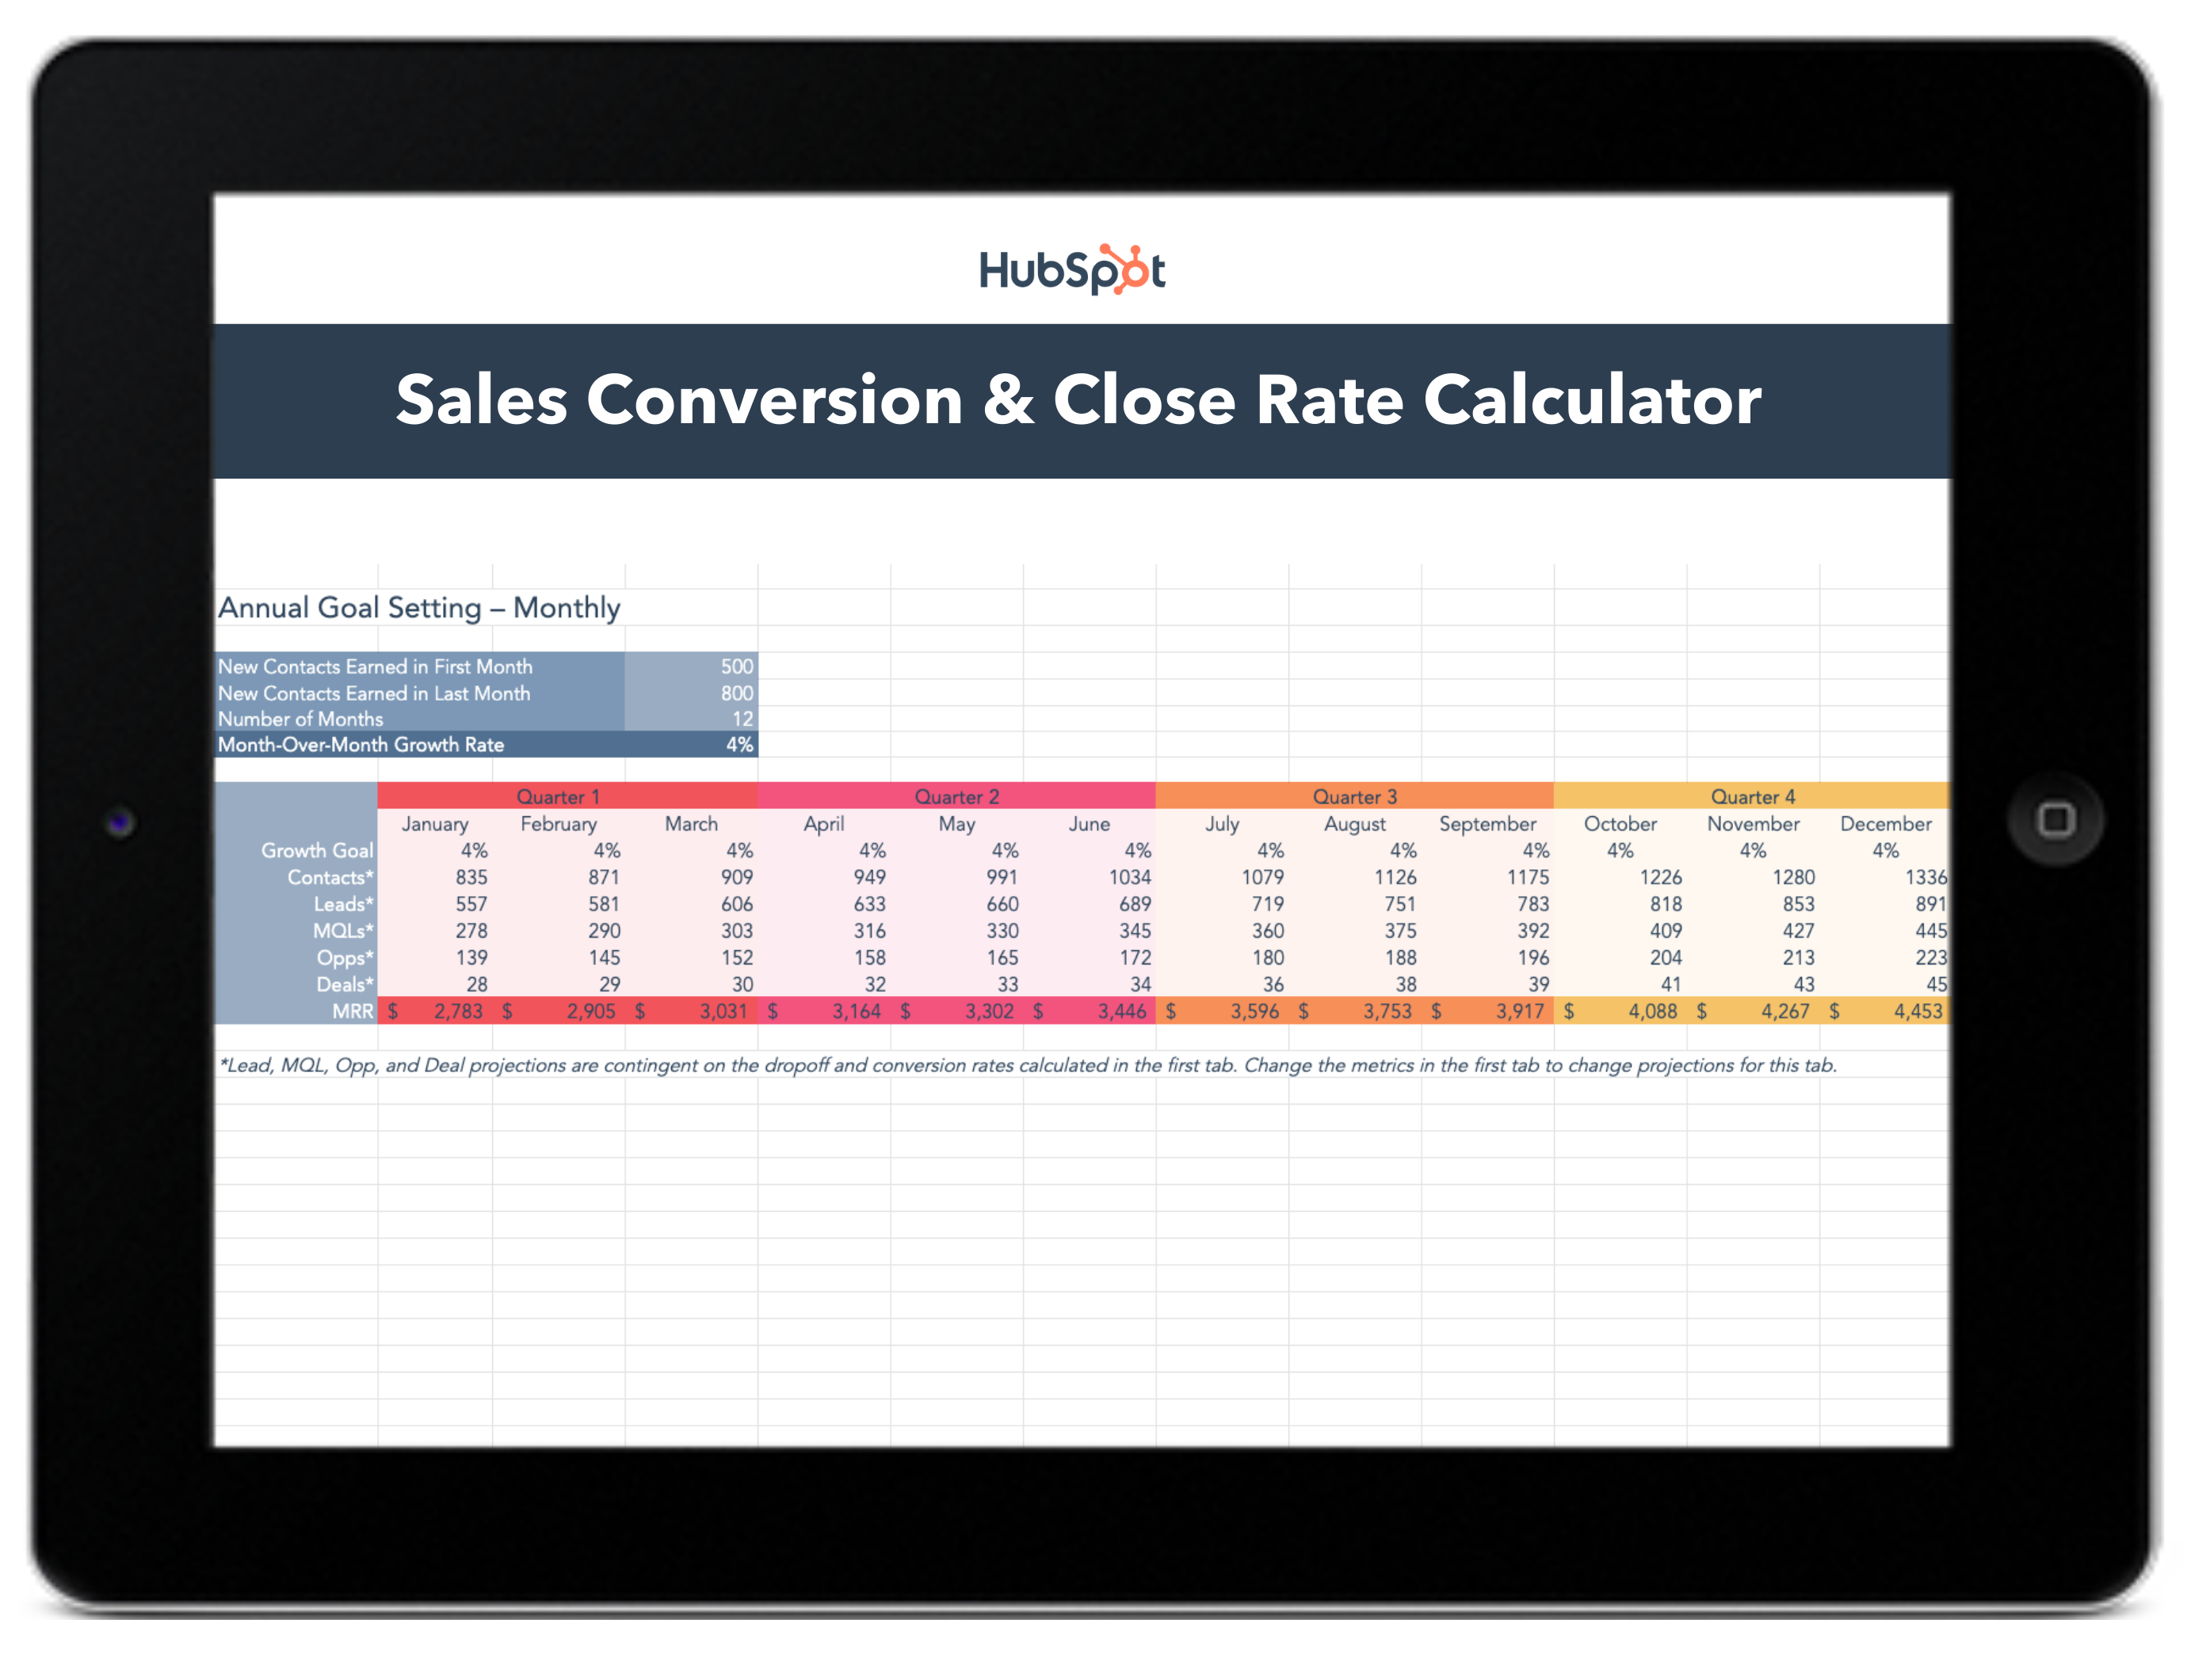 download-the-sales-conversion-and-close-rates-calculator-and-guide